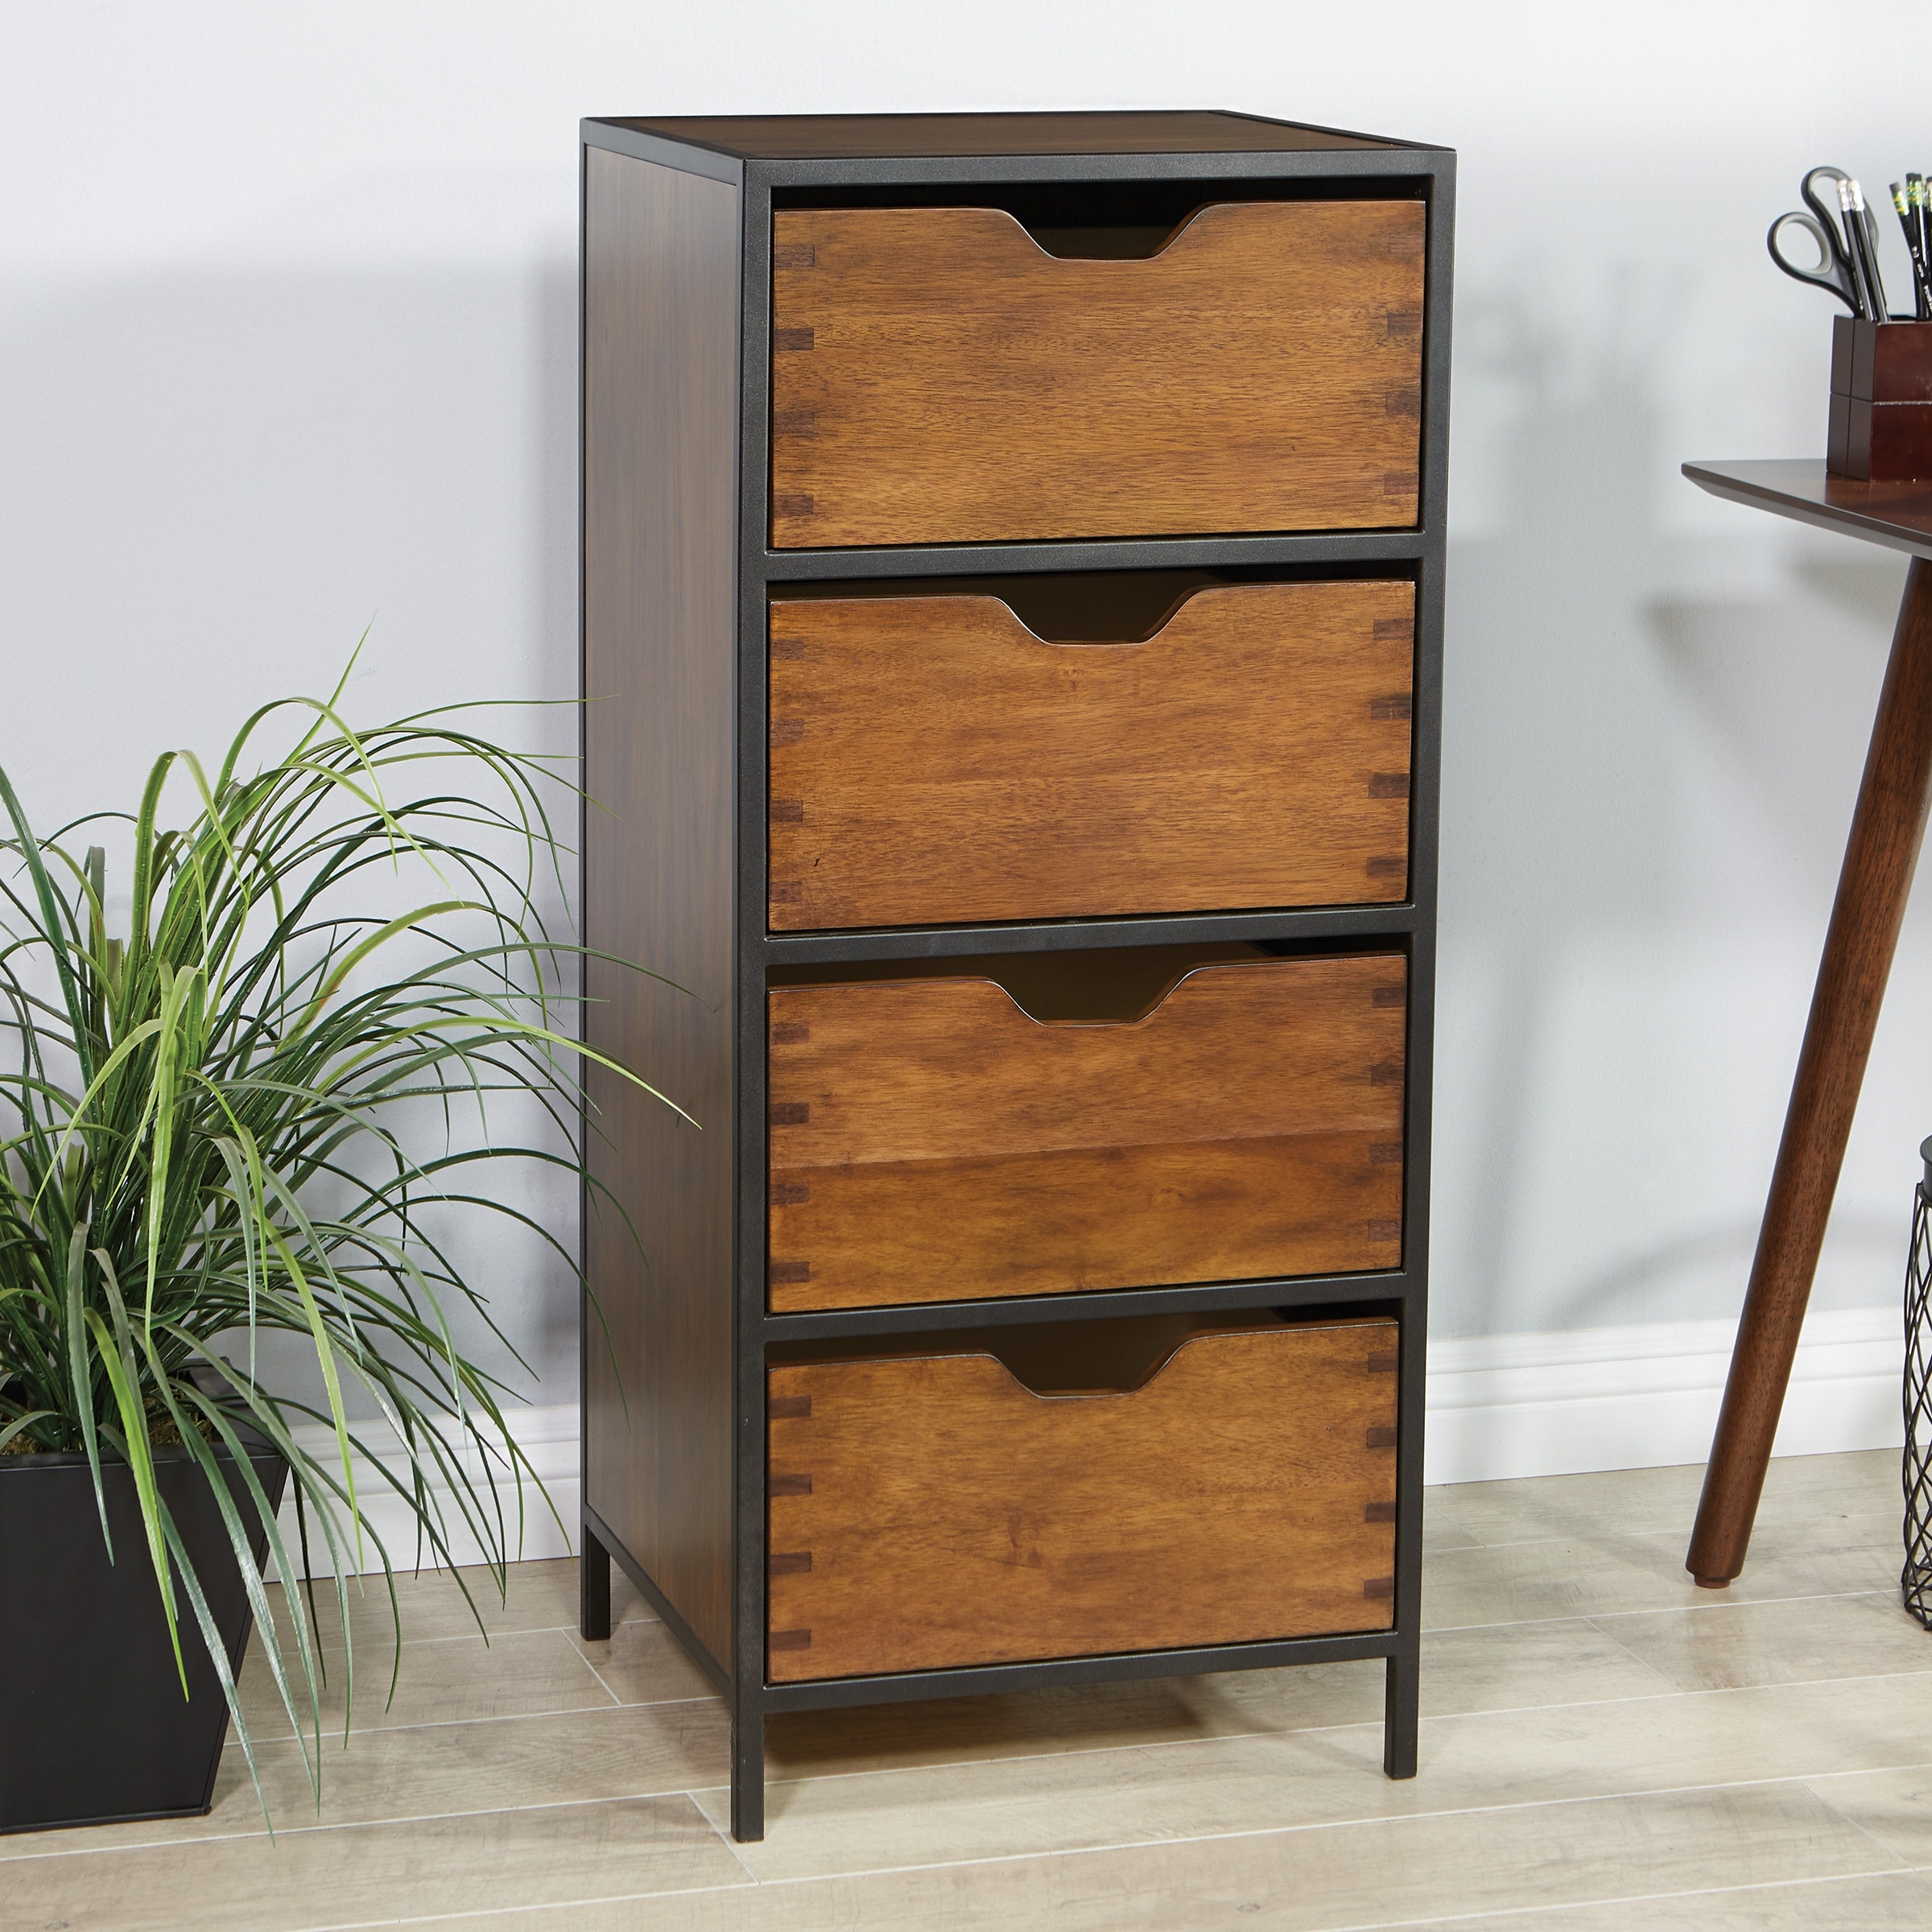 https://ak1.ostkcdn.com/images/products/is/images/direct/020b5414639c04482b7424f7fb775ead7a9ec8f3/Clermont-4-Drawer-Storage-Cabinet.jpg